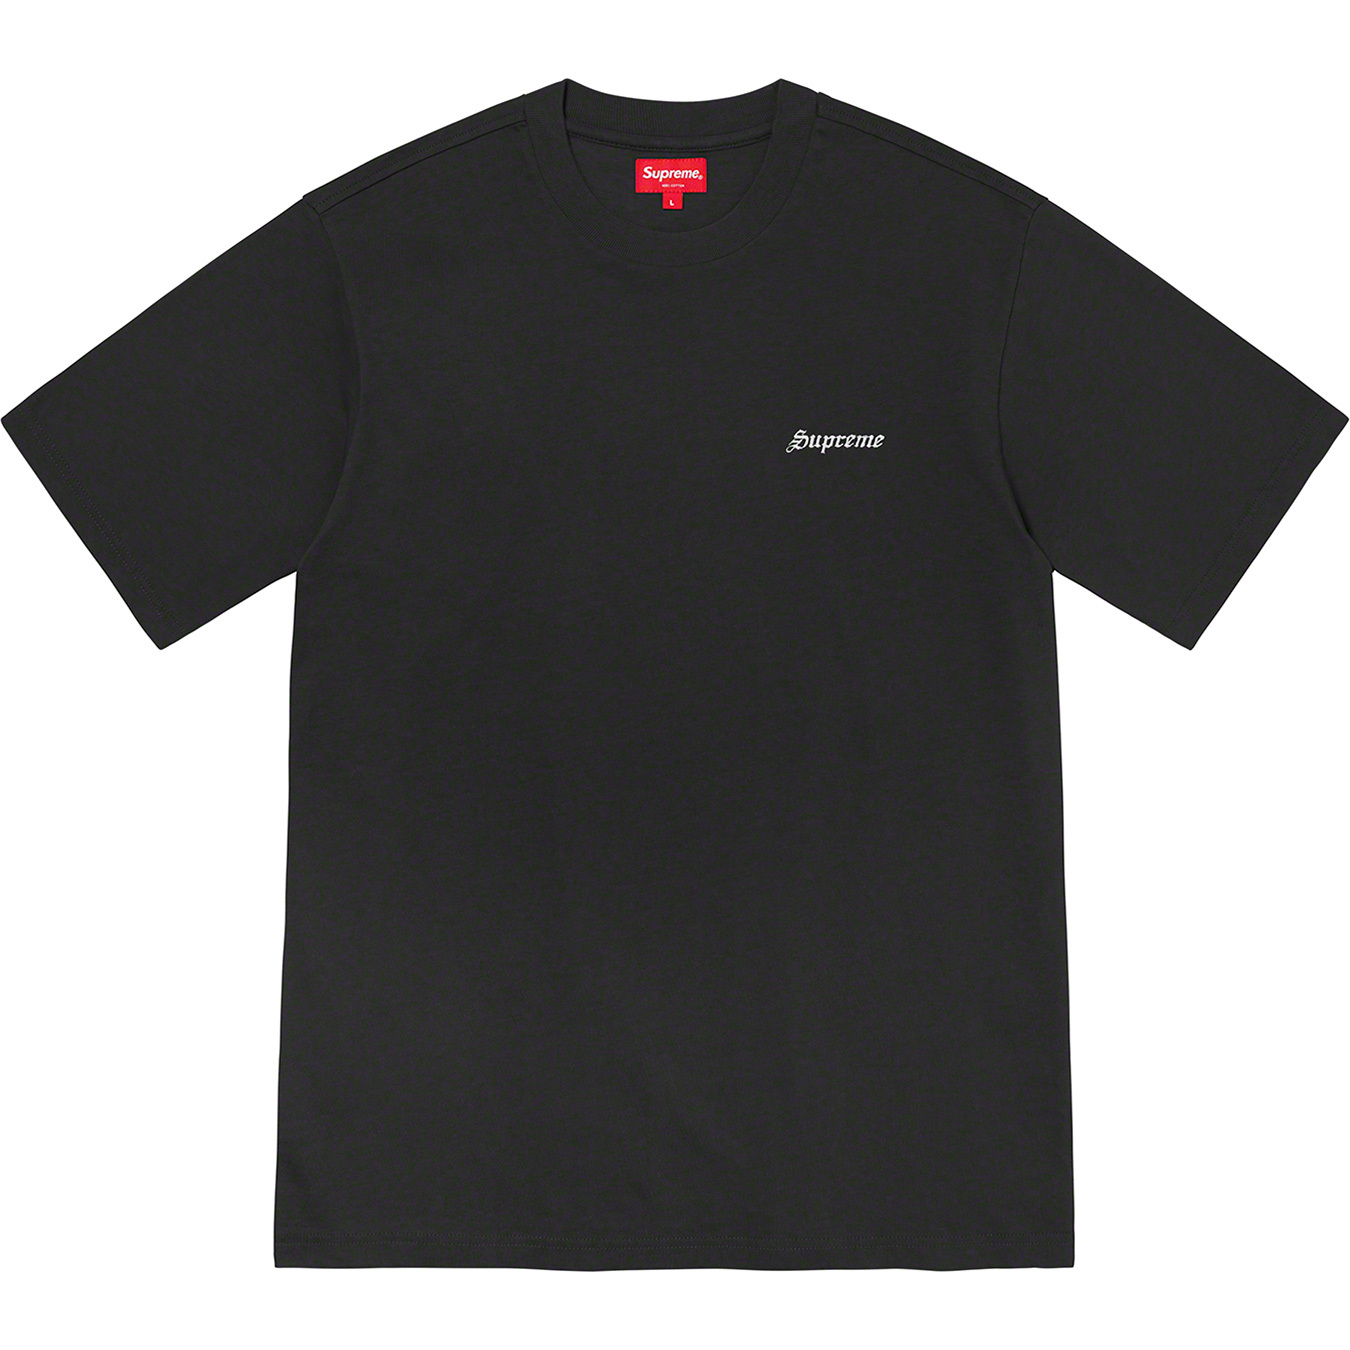 Washed S/S Tee | Supreme 20fw